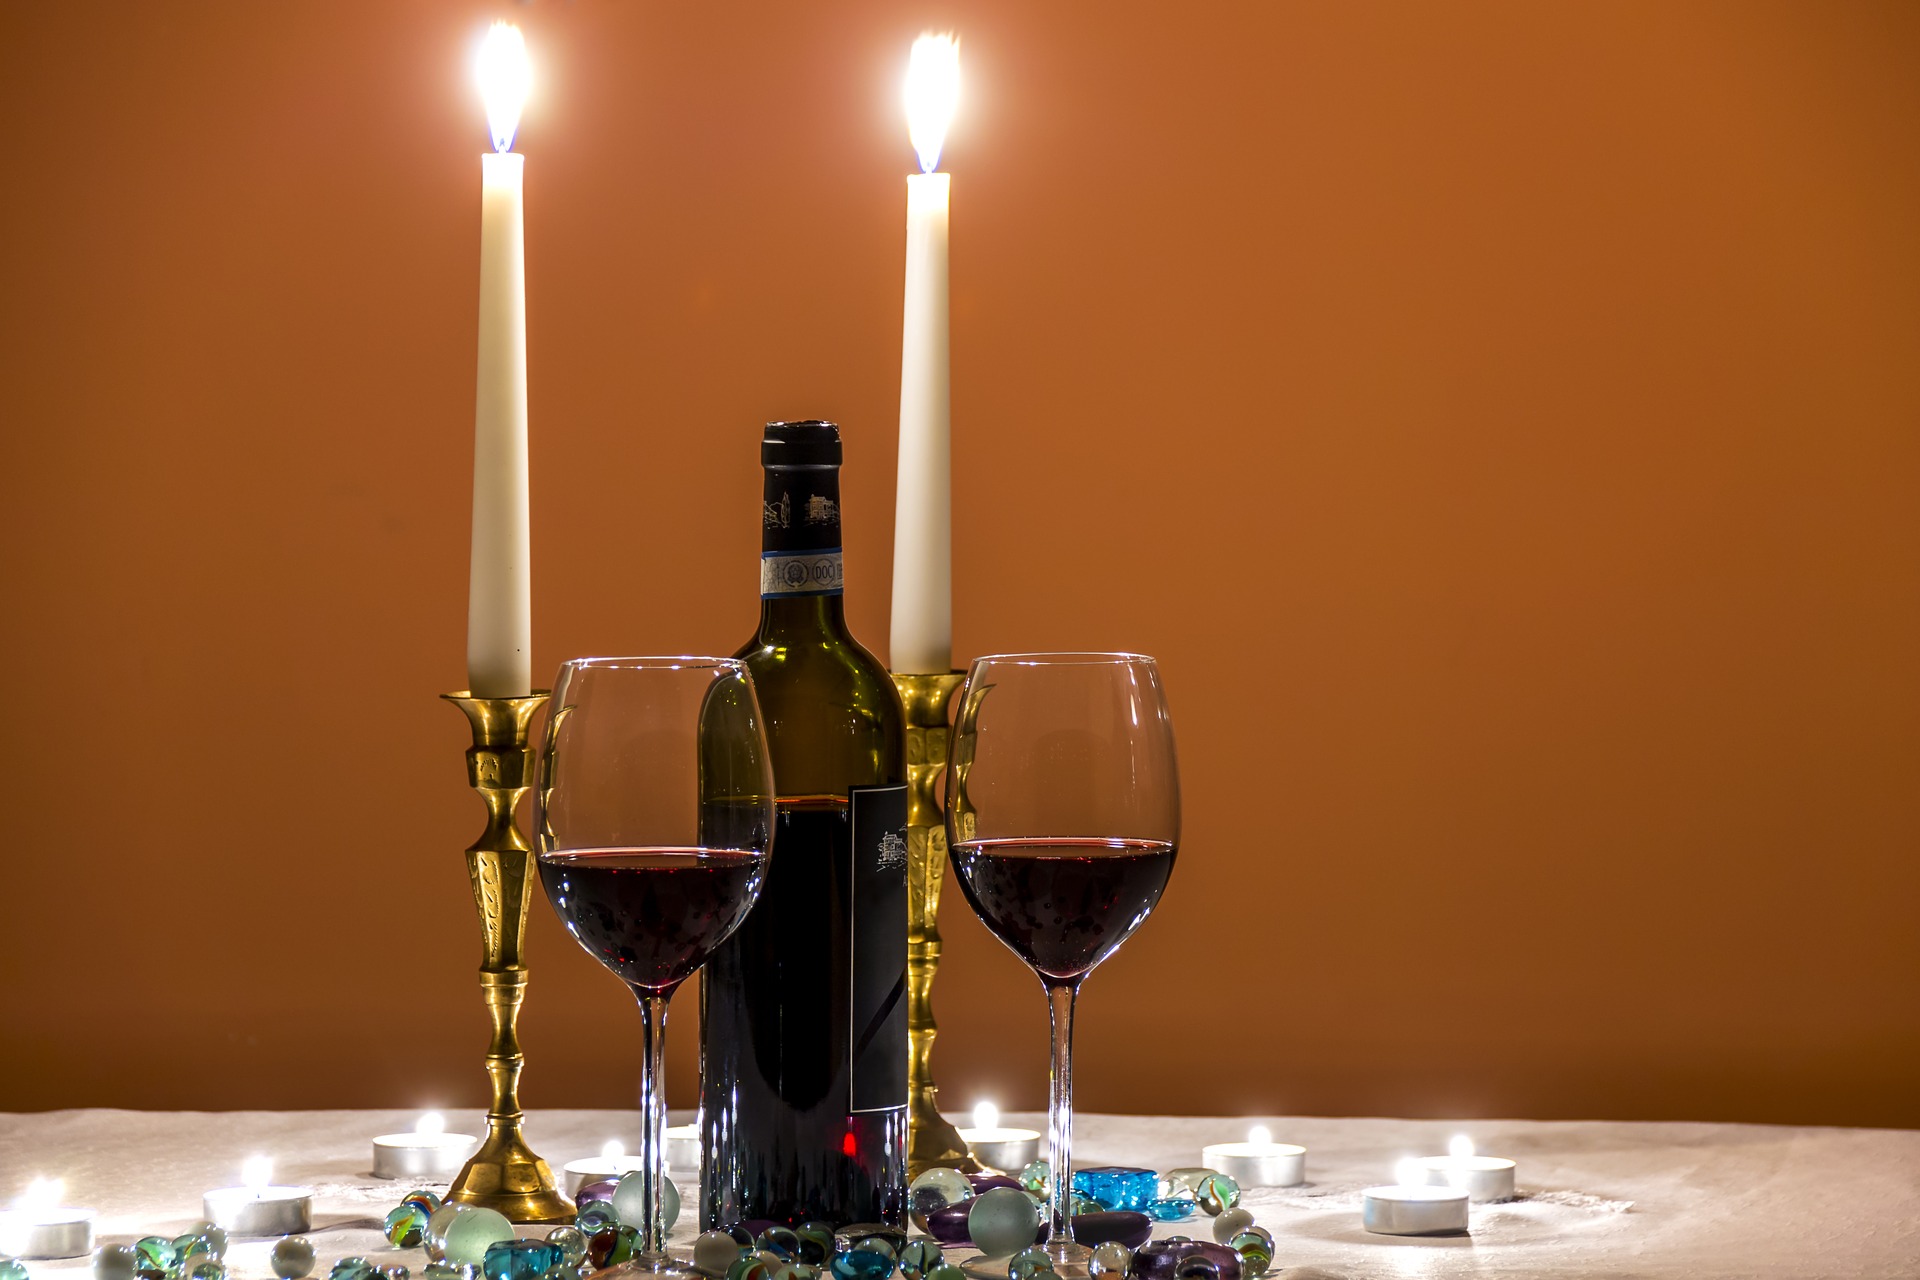 Shabbat candles and wine set on a white tablecloth